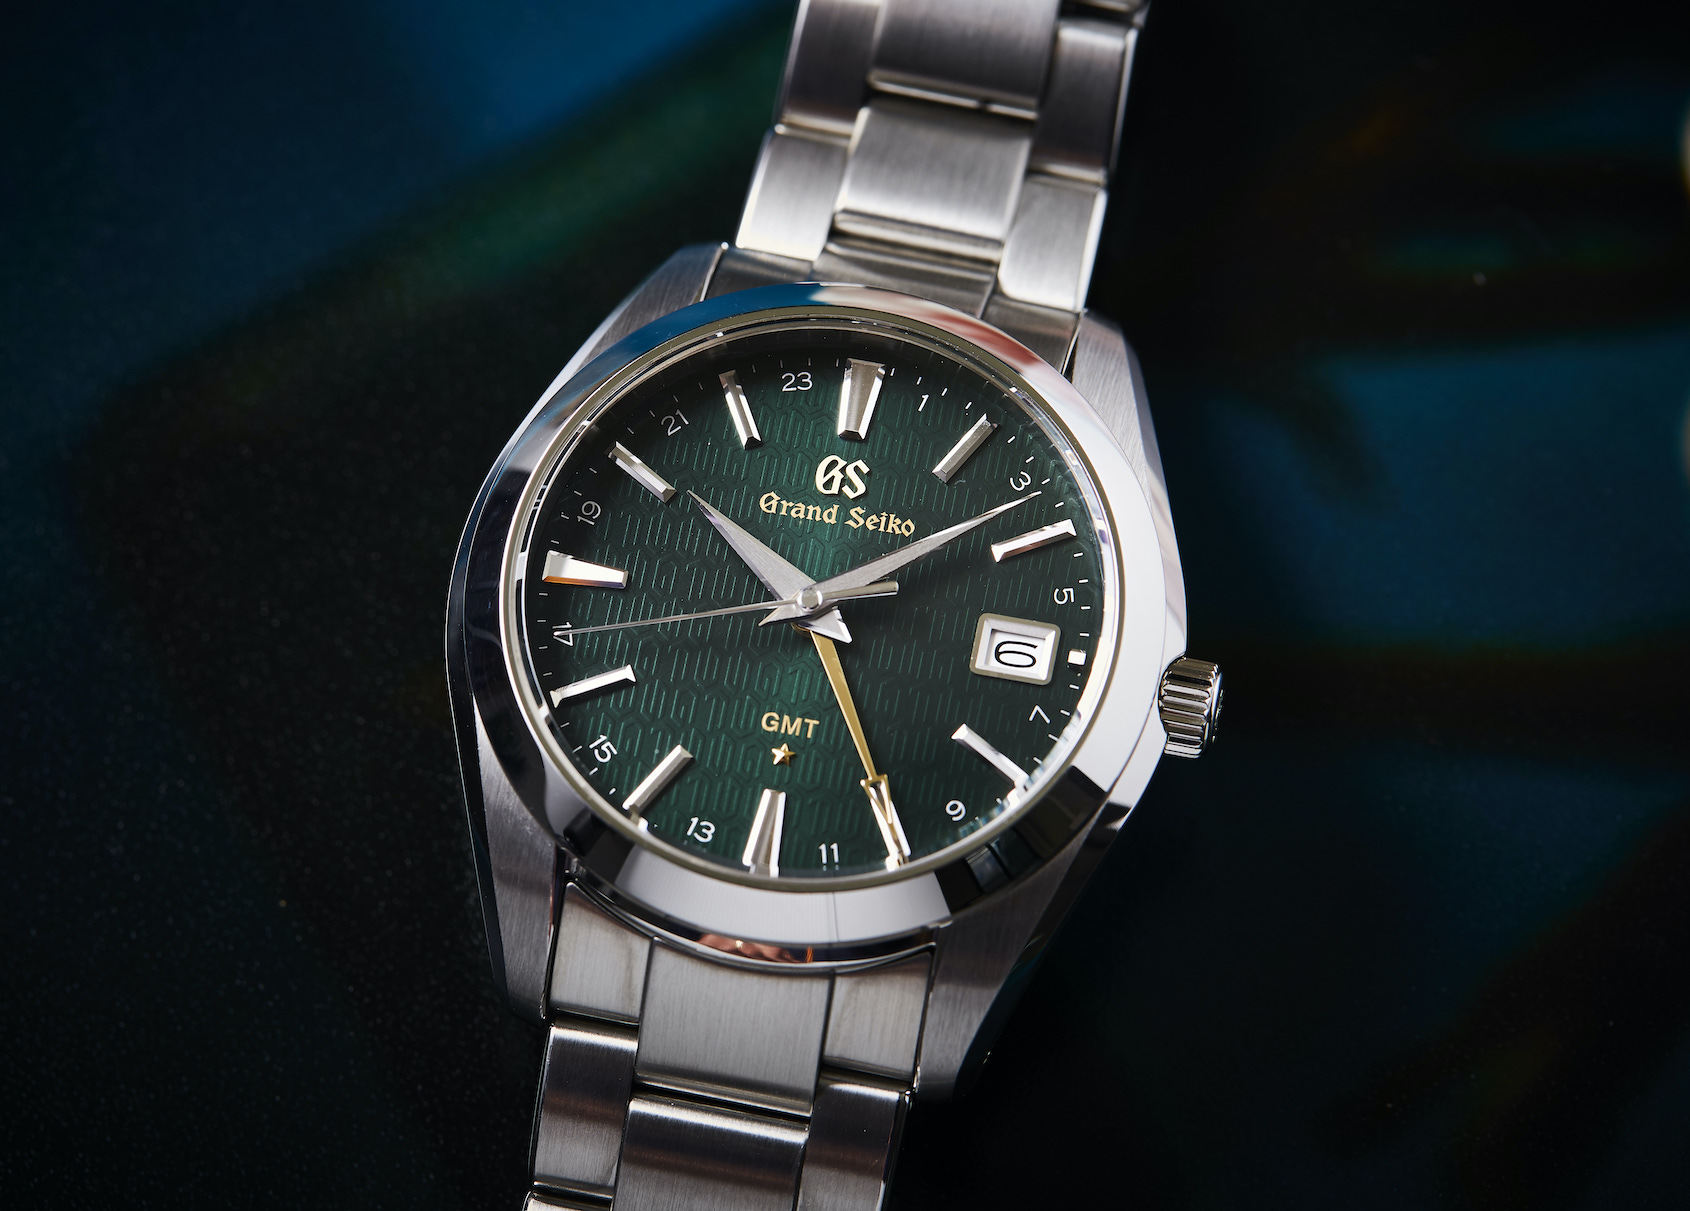 VIDEO: Why I bought a quartz Grand Seiko SBGN007 as my first 